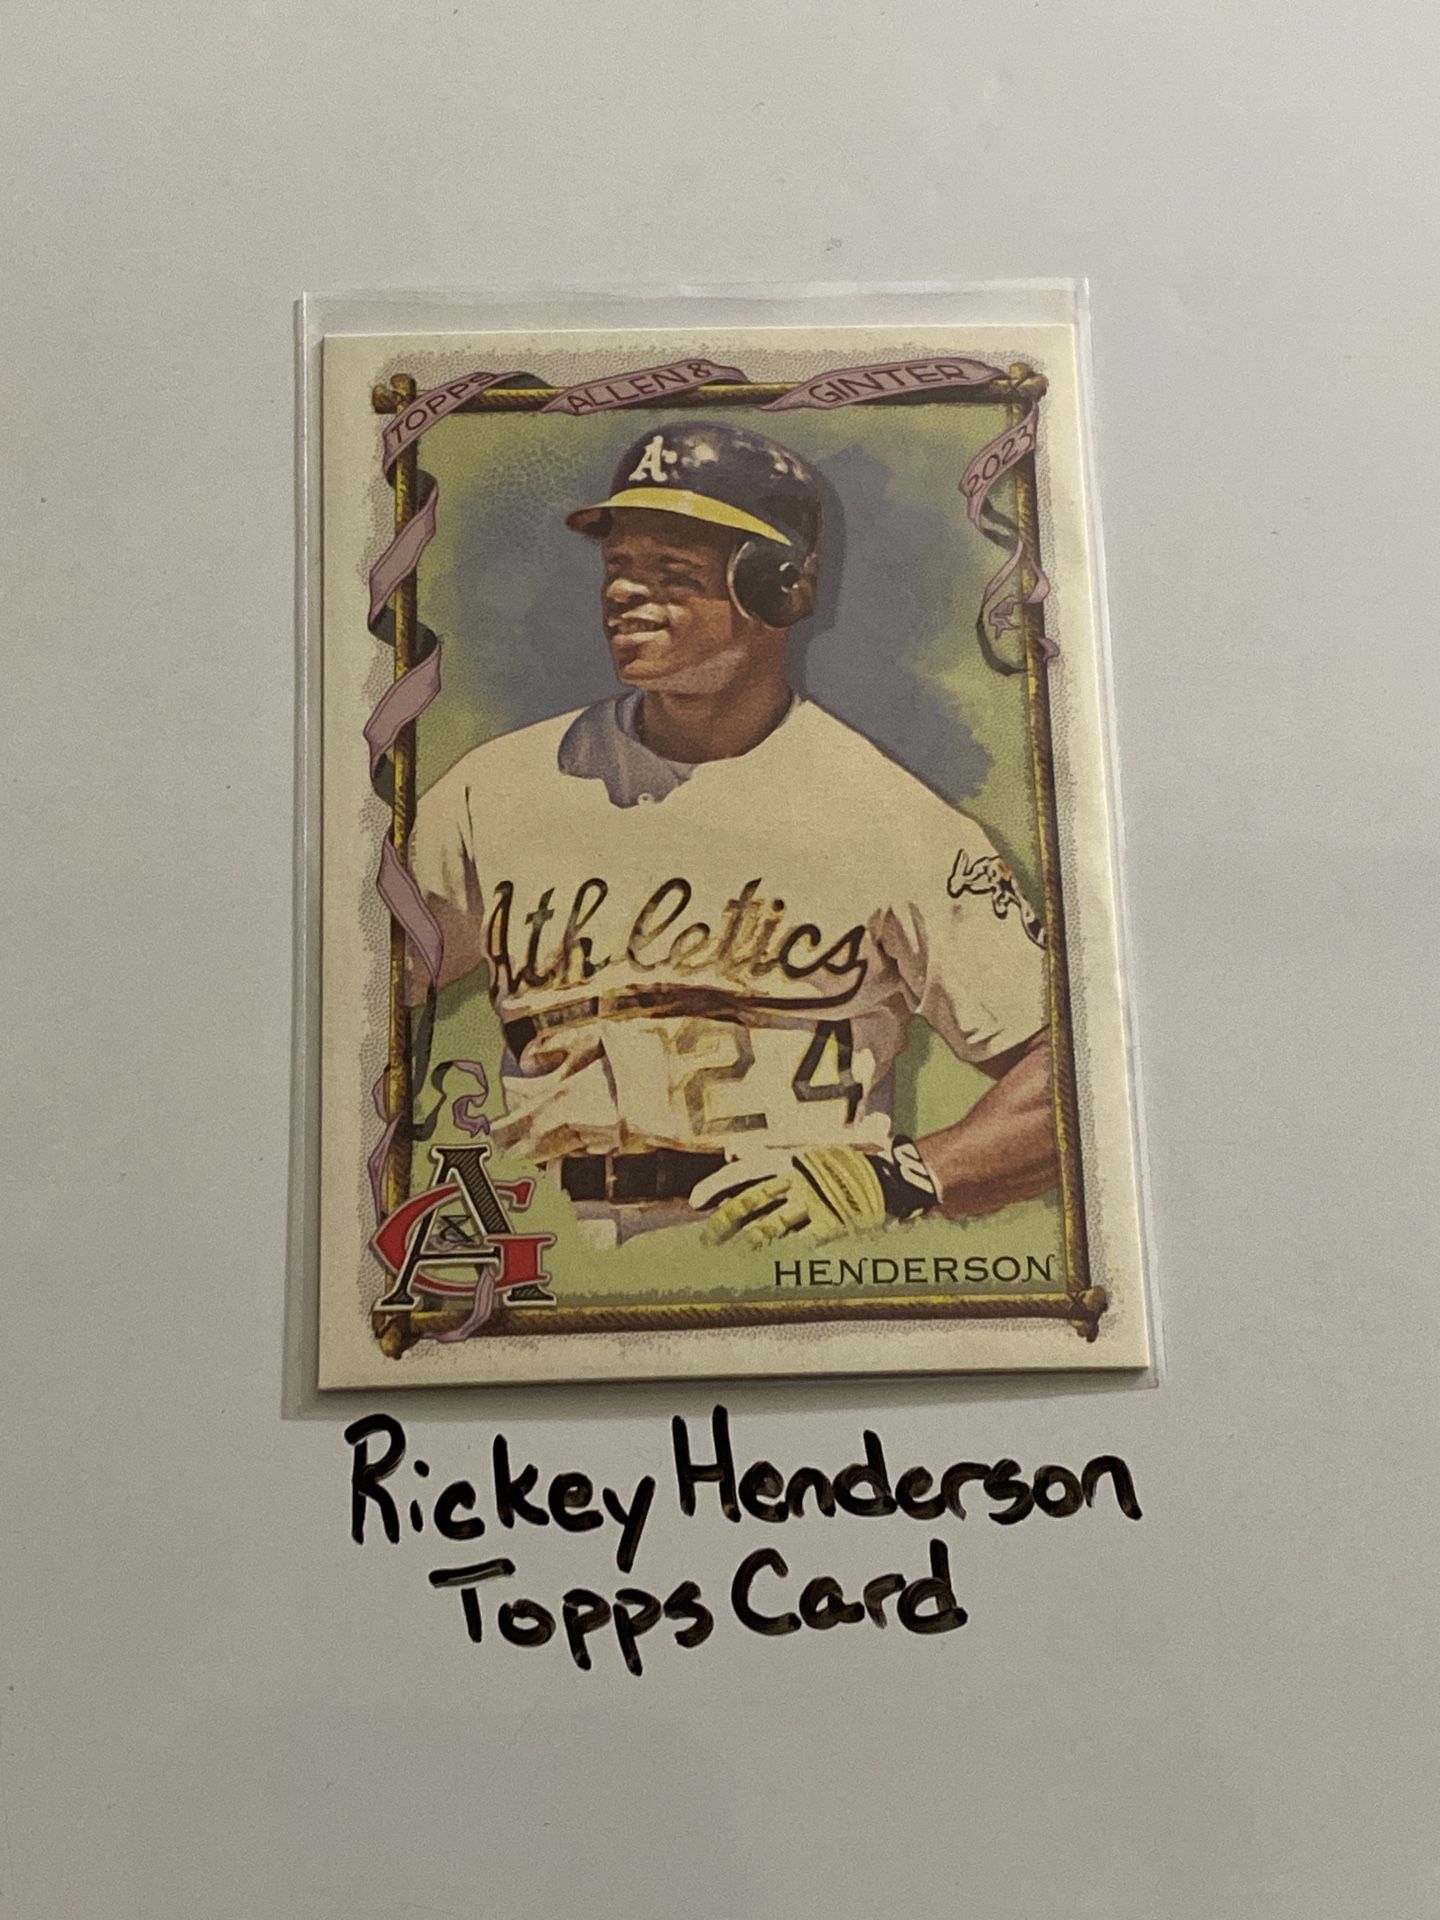 Rickey Henderson Oakland A’s Hall of Fame Outfielder Topps Card. 